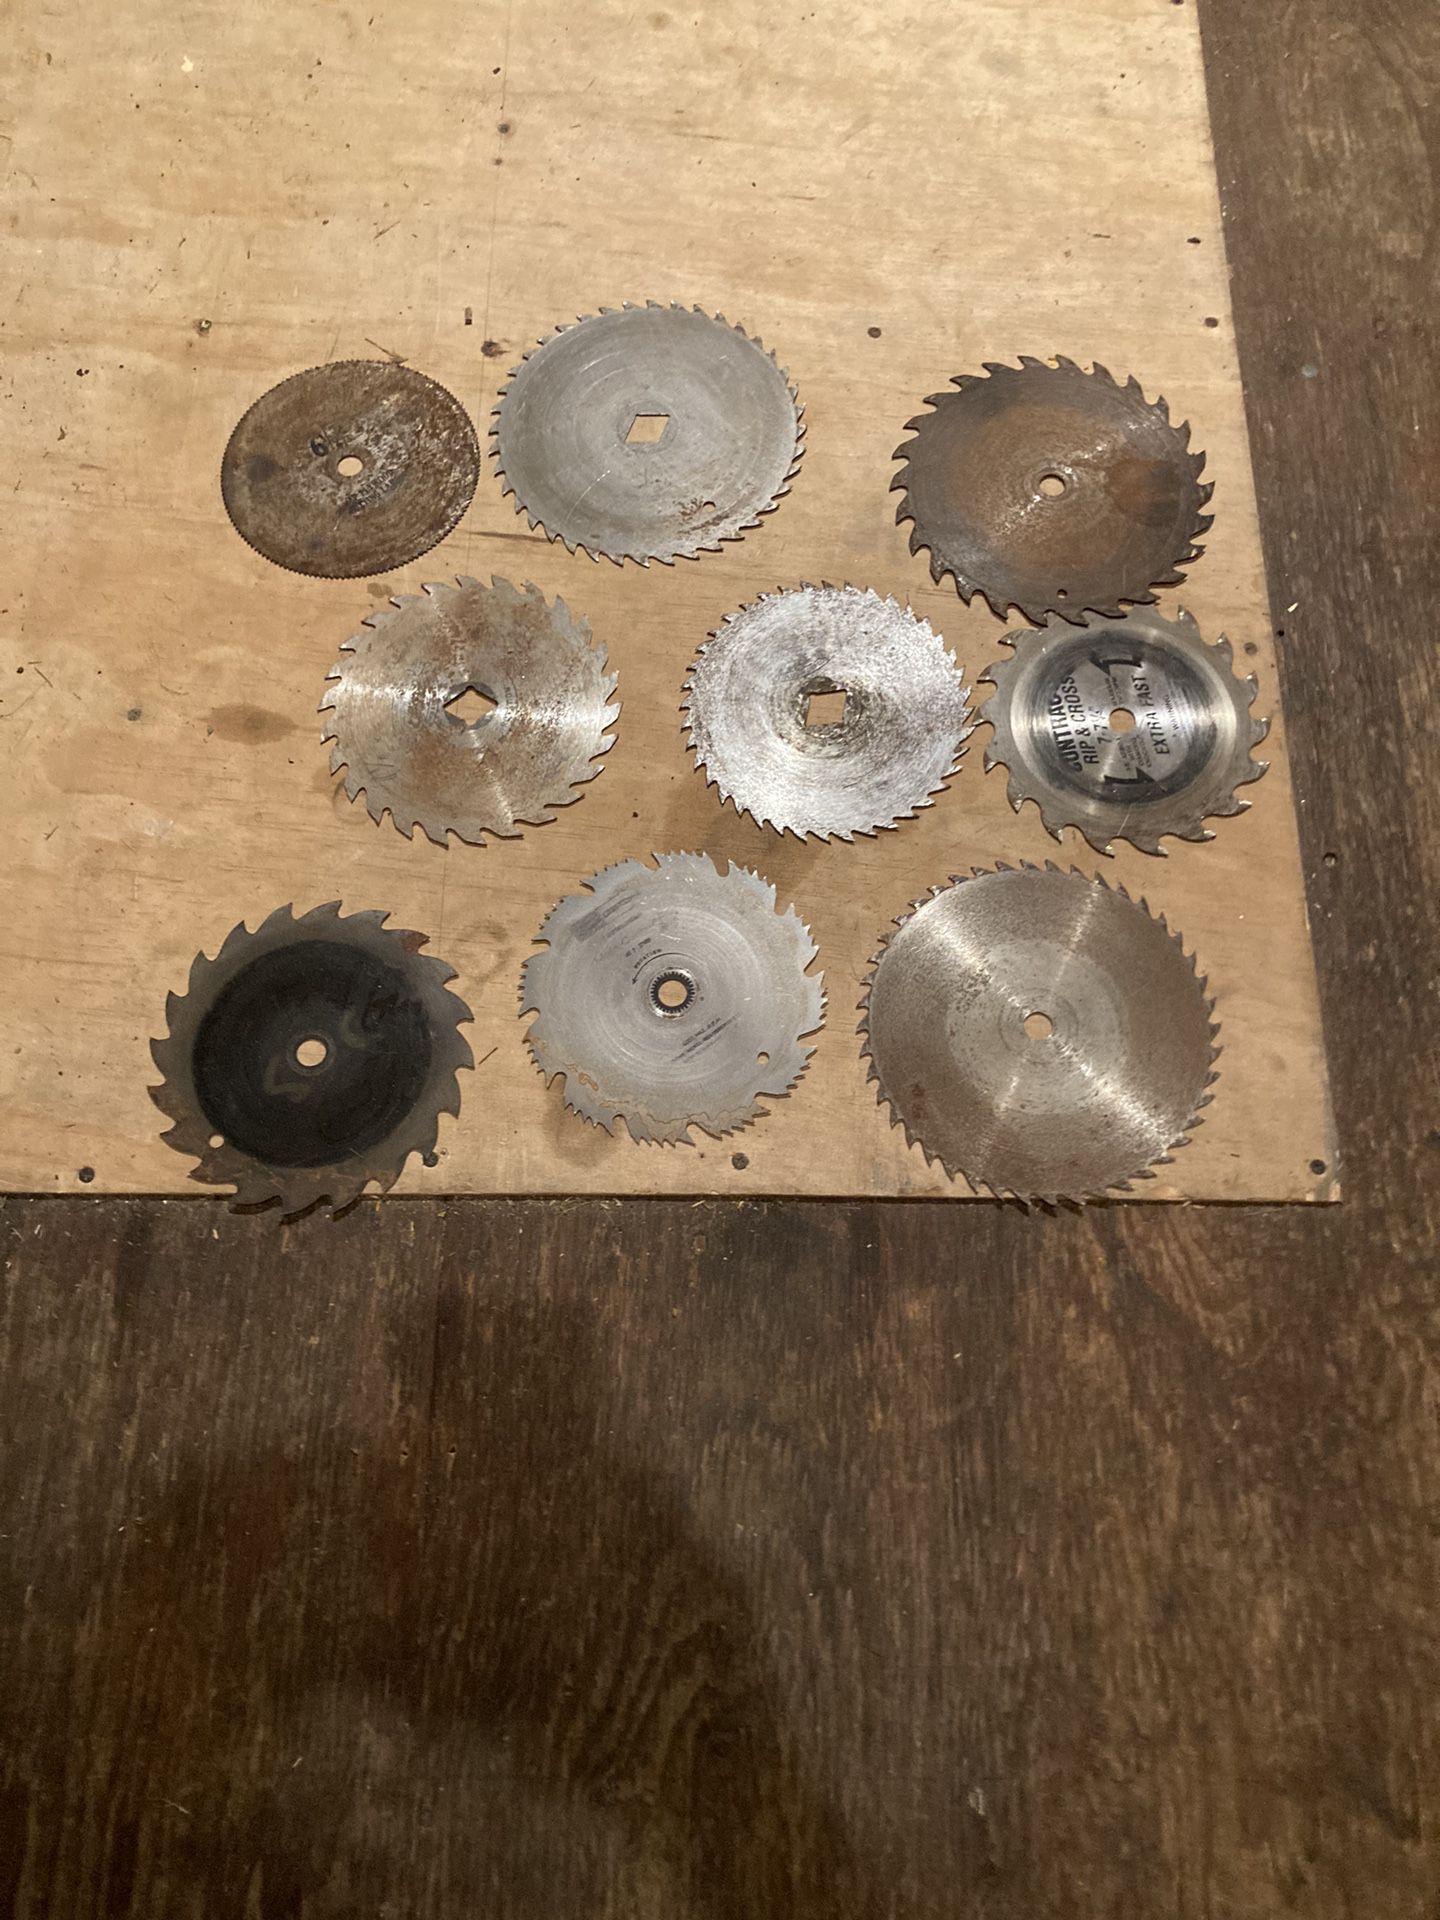 Circular saw blades nine of them all great condition $20 for all